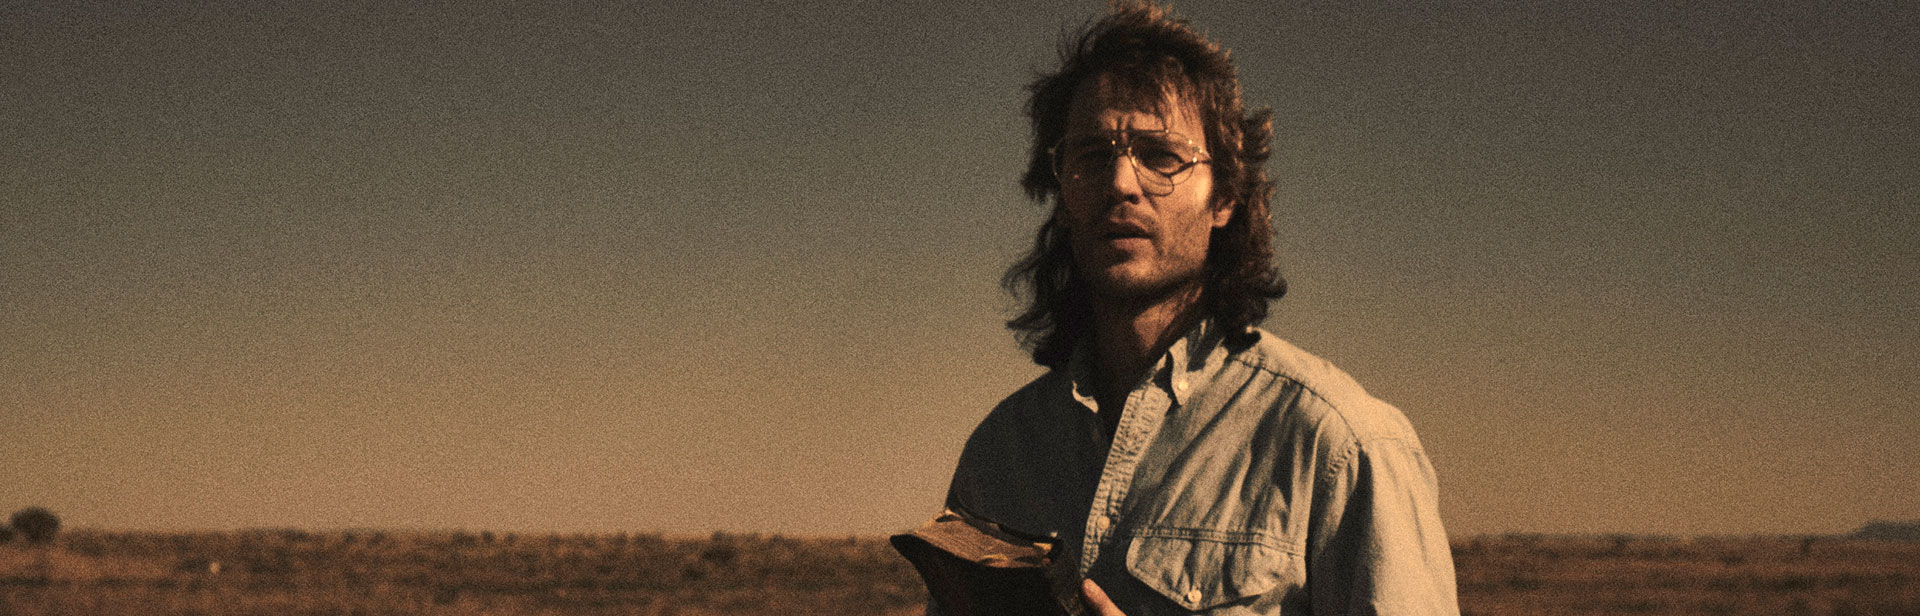 ​WACO: The story that shook the world